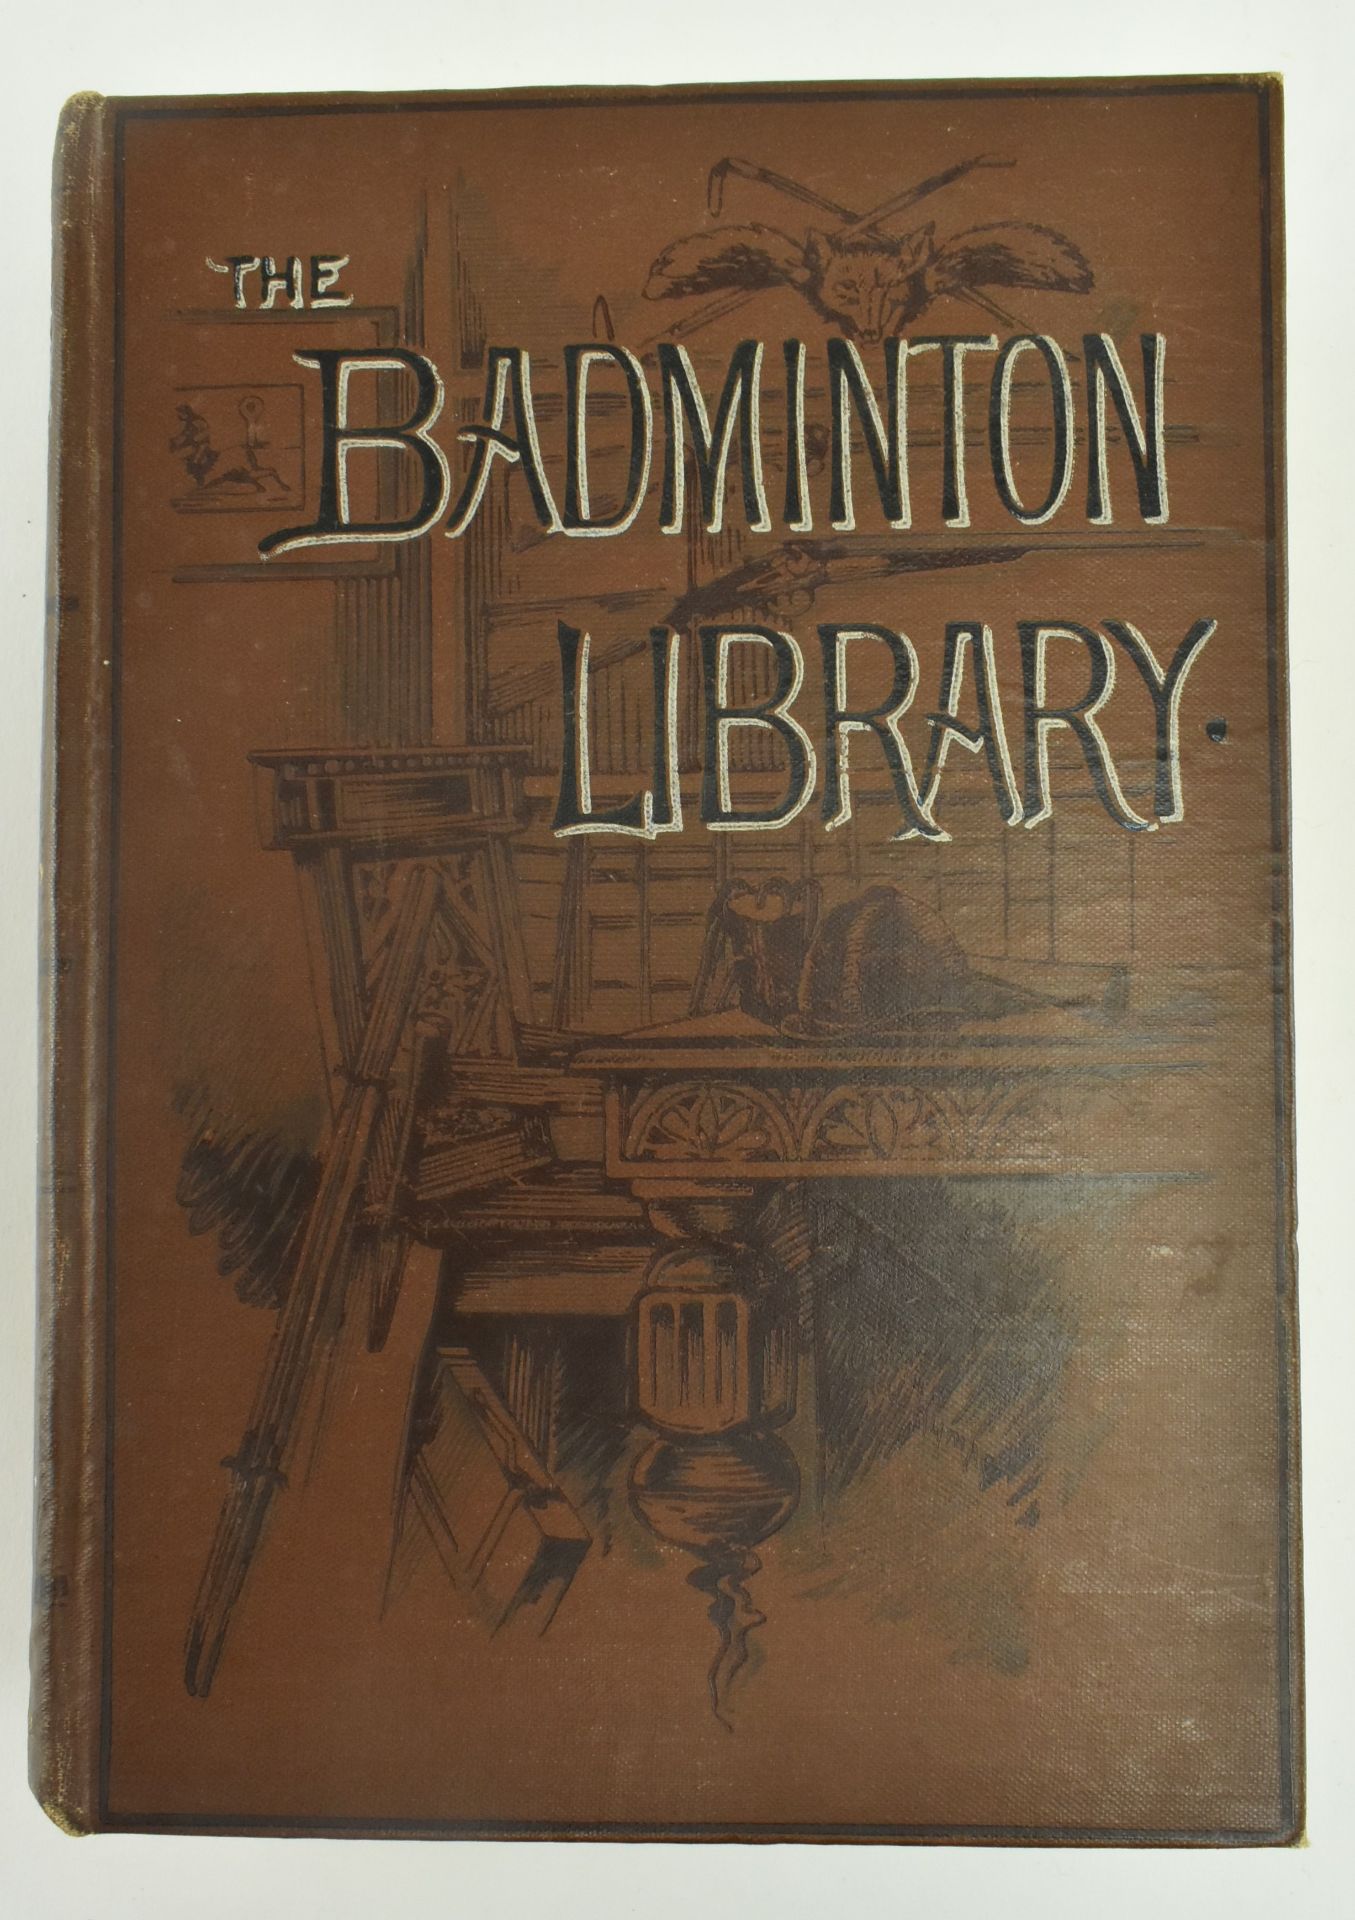 CRICKET INTEREST. THREE BADMINTON LIBRARY EDITIONS ON CRICKET - Image 3 of 14